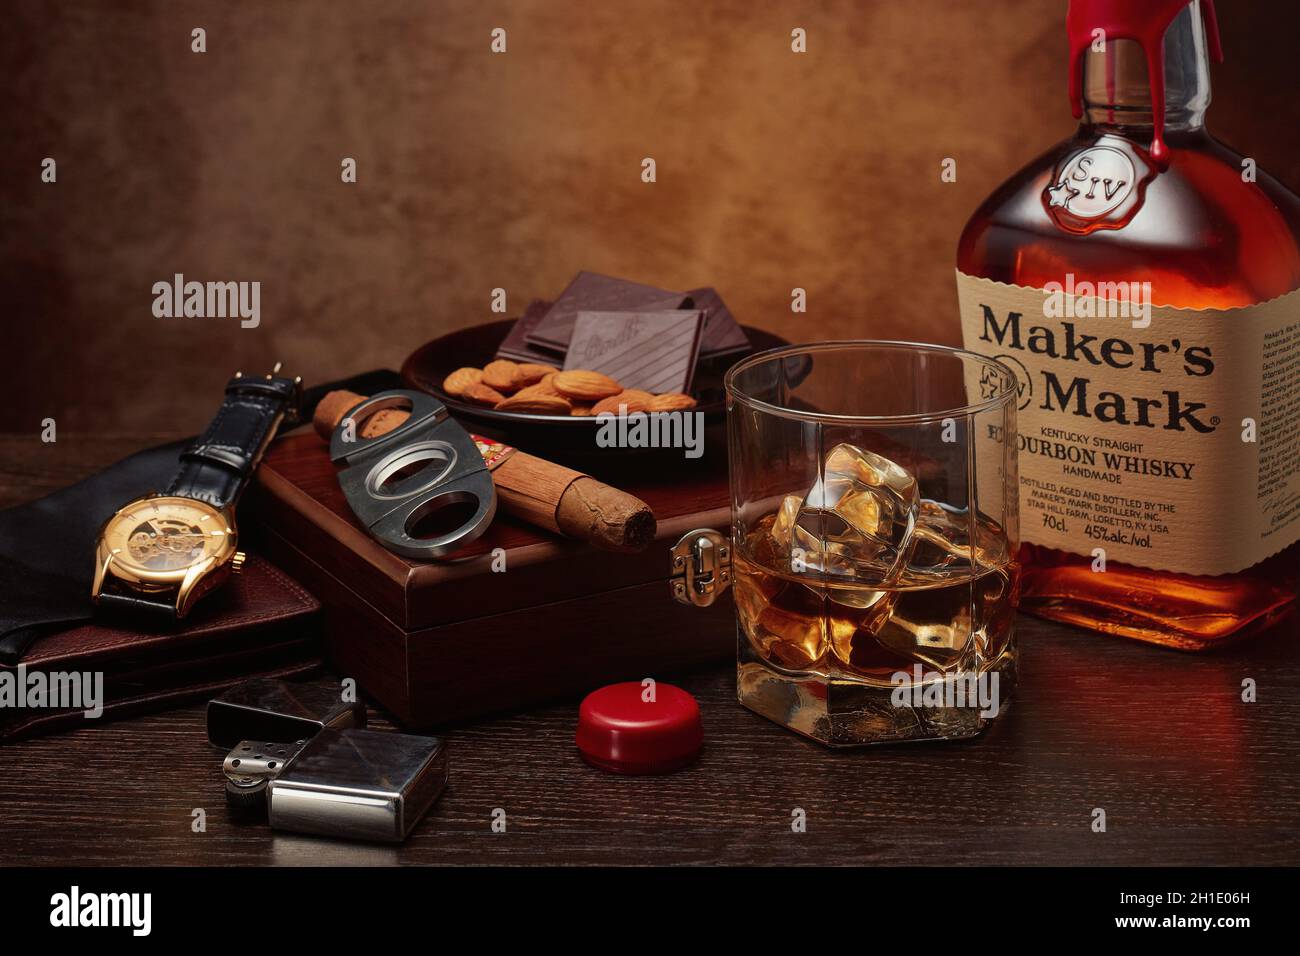 St.Petersburg, Russia - March 2020 - Still life with bottle of Maker's Mark kentucky straight bourbon whisky, glass, box with cigar, nuts and chocolat Stock Photo